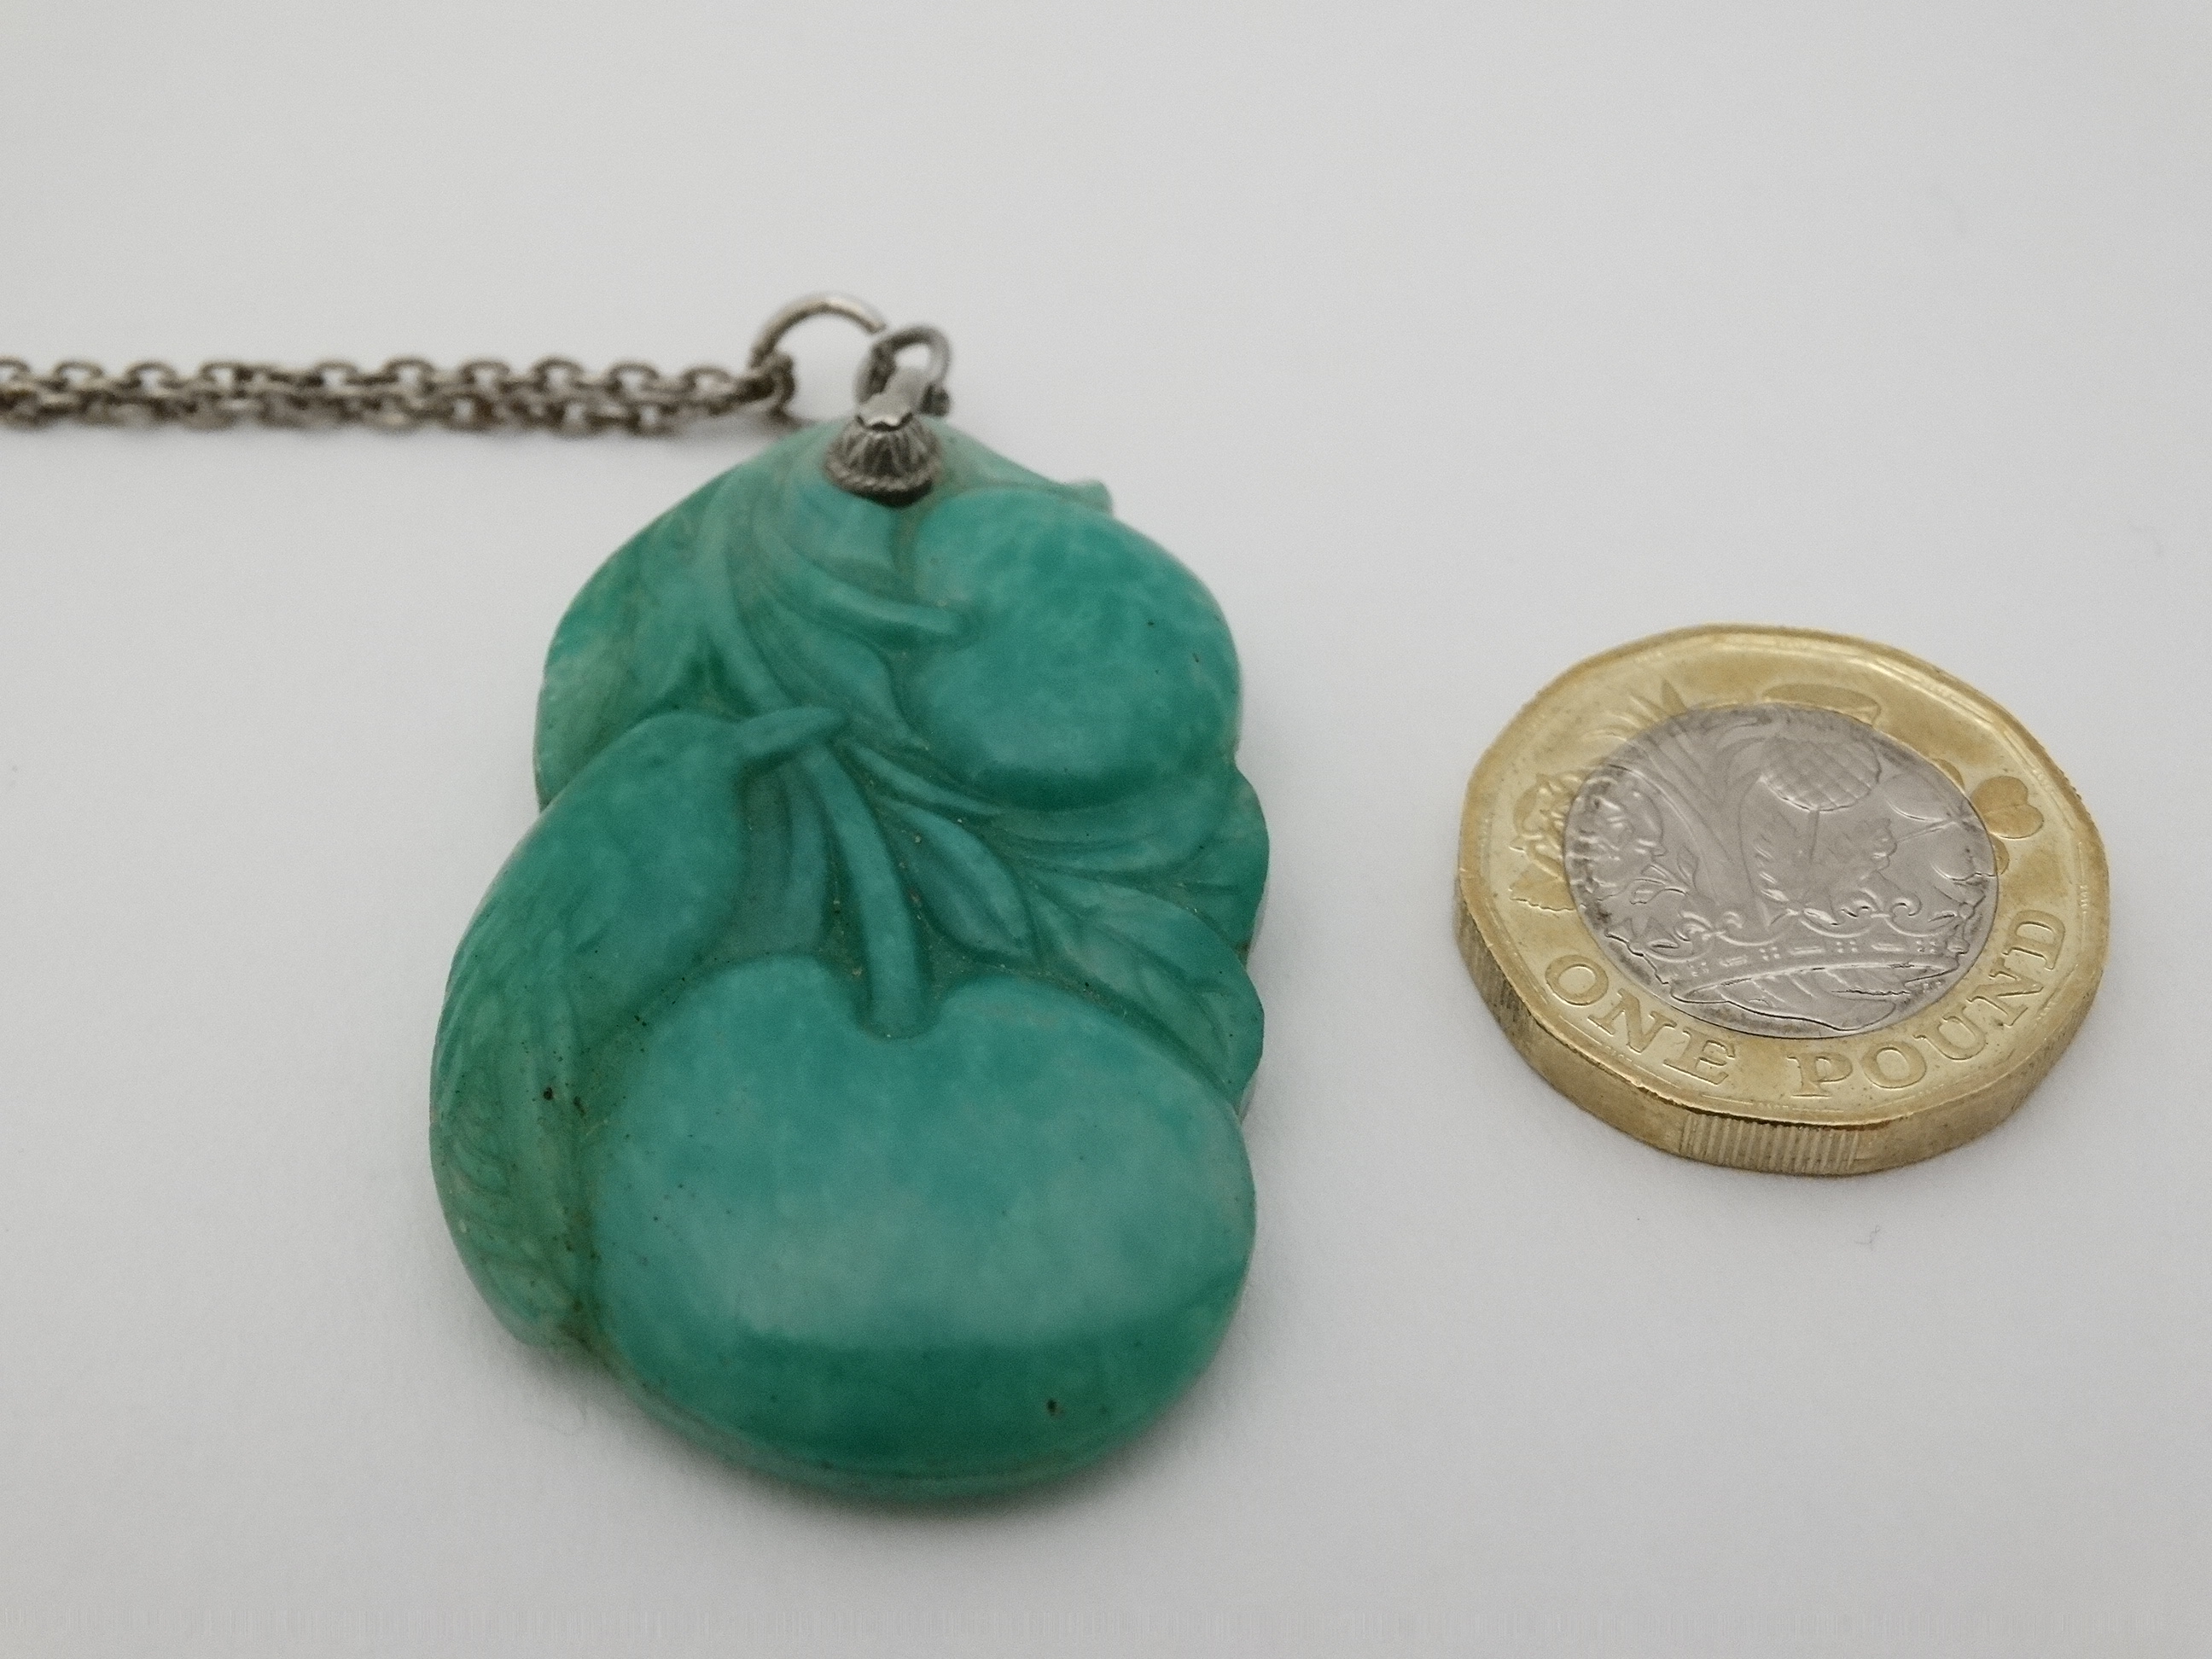 A carved green jade pendant depicting a bird with fruit 1 3/4" long CONDITION: